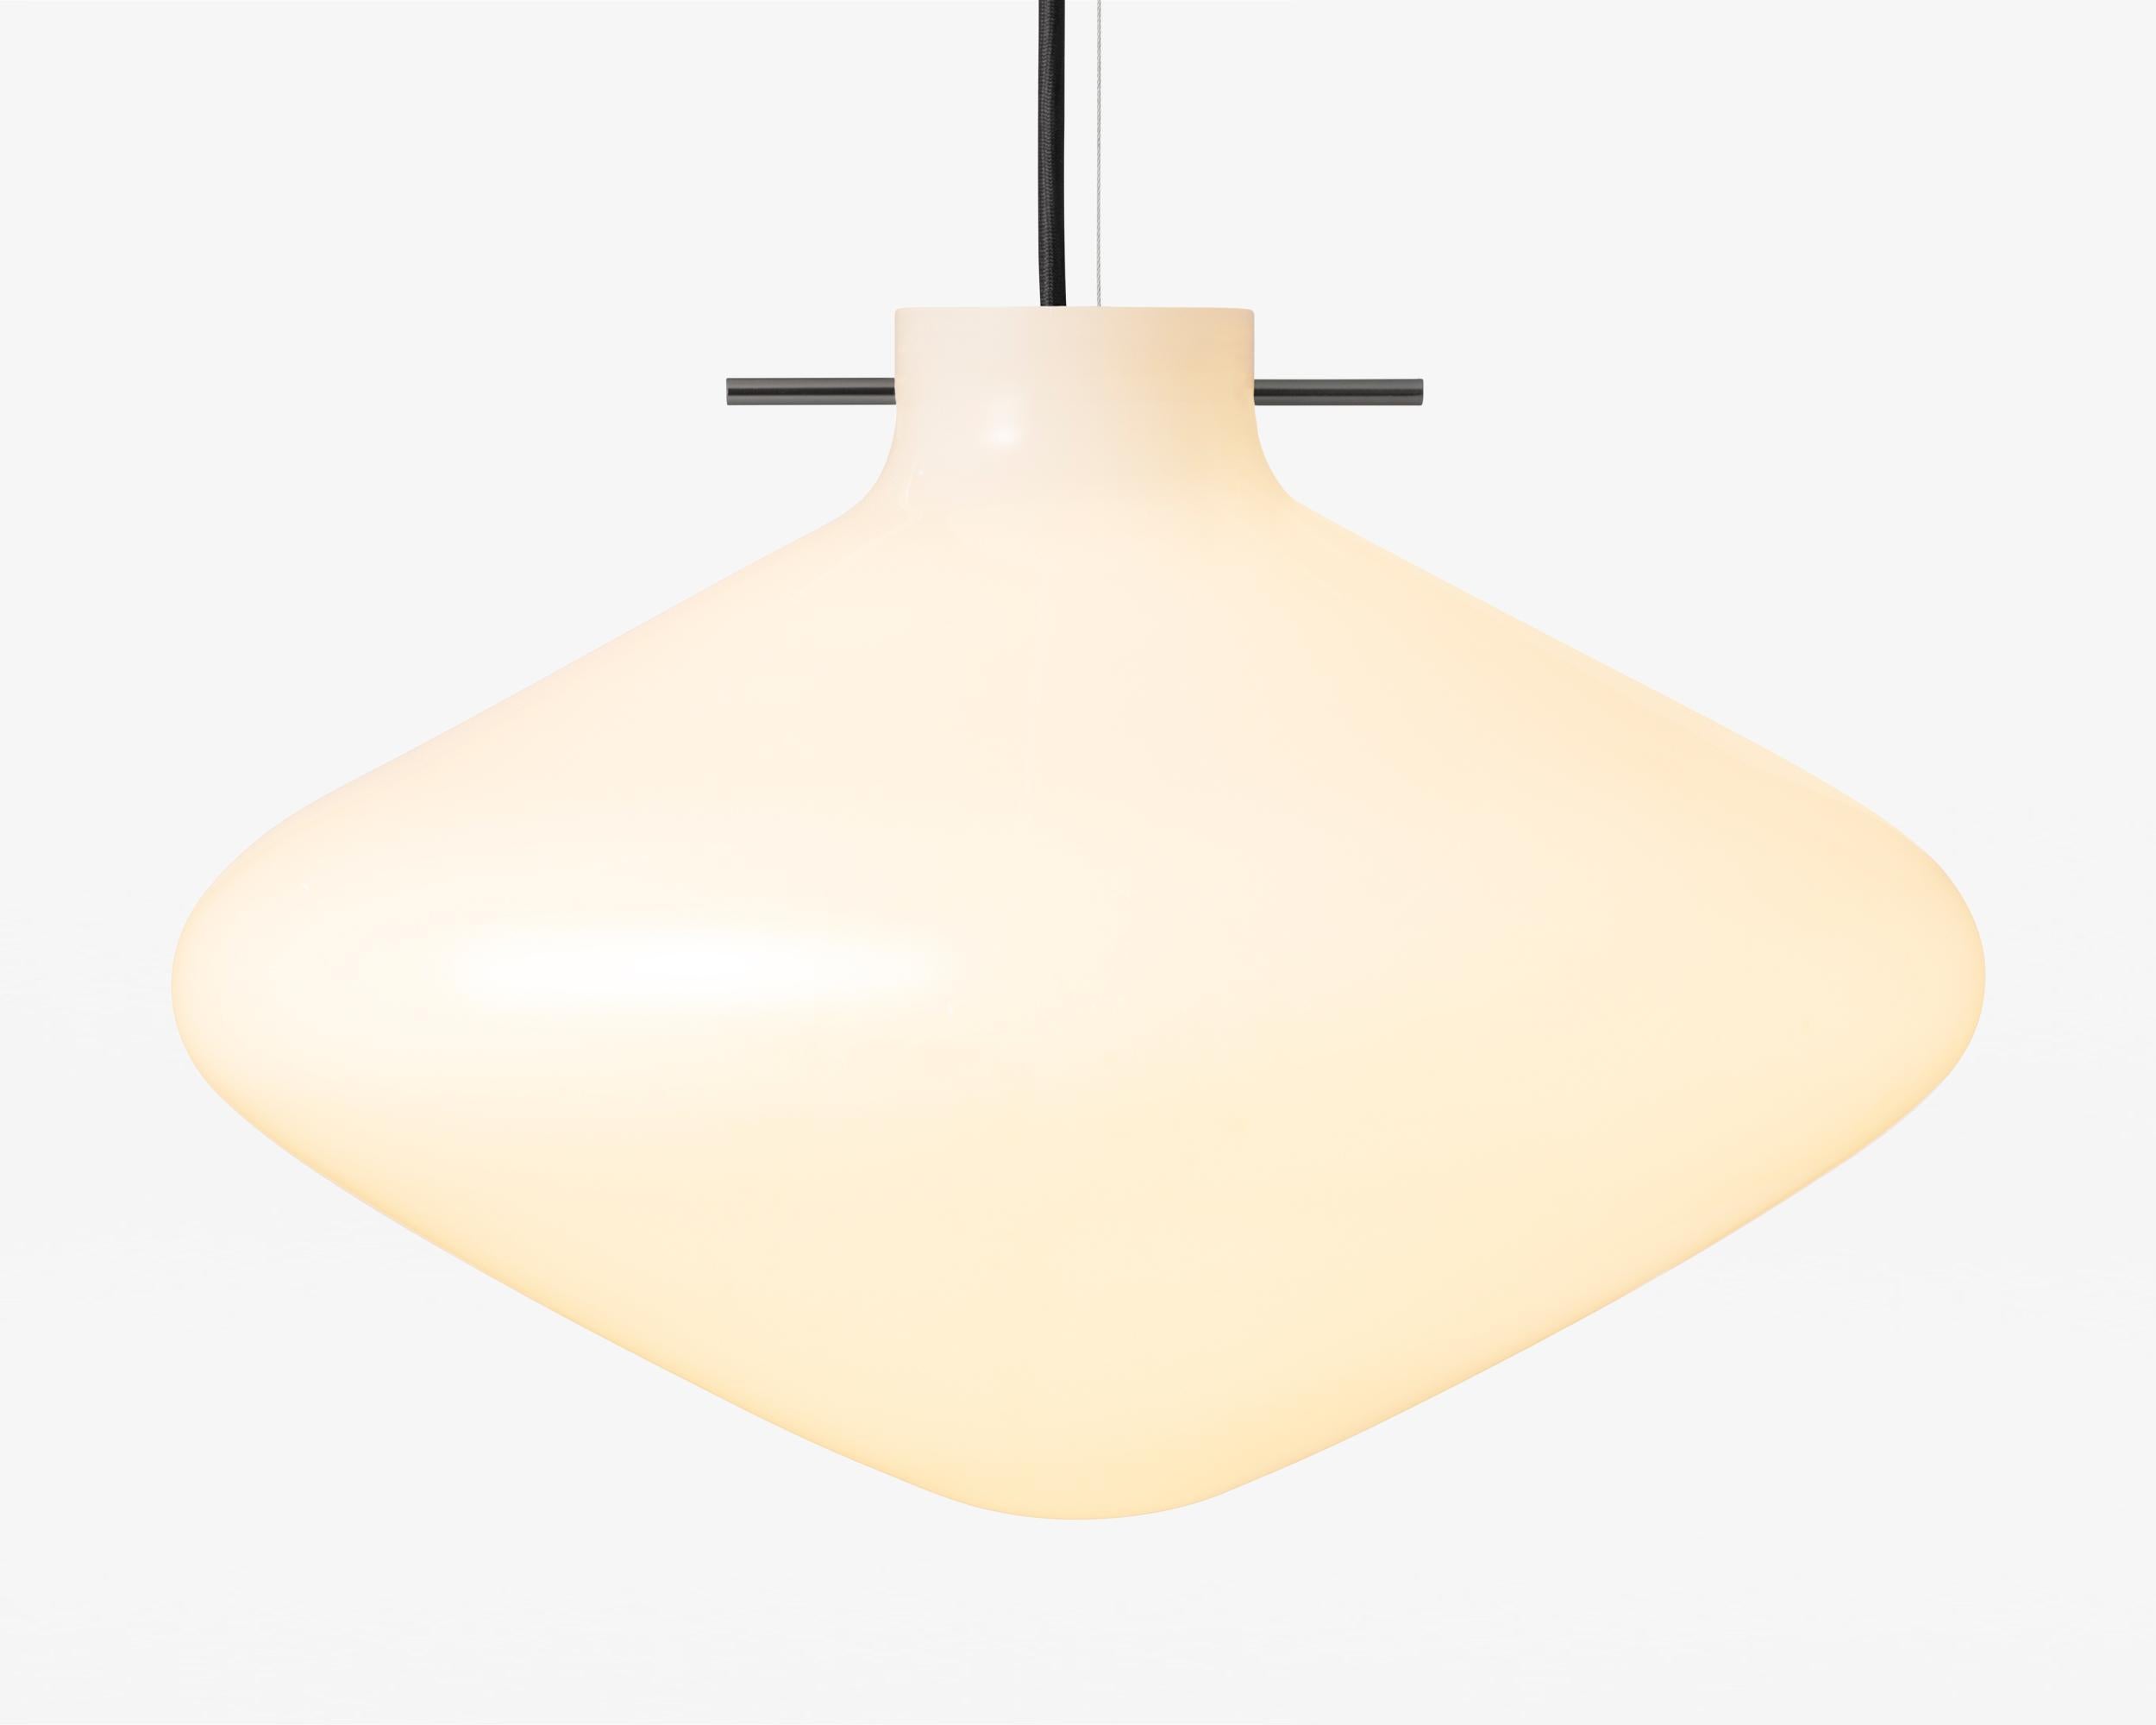 Pendant lamp repose / 400 BY LYFA

Pendant lamp signed by GamFratesi for LYFA

Measures: D.260 mm H.252 mm
Opal glass / black steel or brass

Textile wire (black or white) 300cm
Light source: E27 max 60W (110V-230V)

-- 
Repose is a new